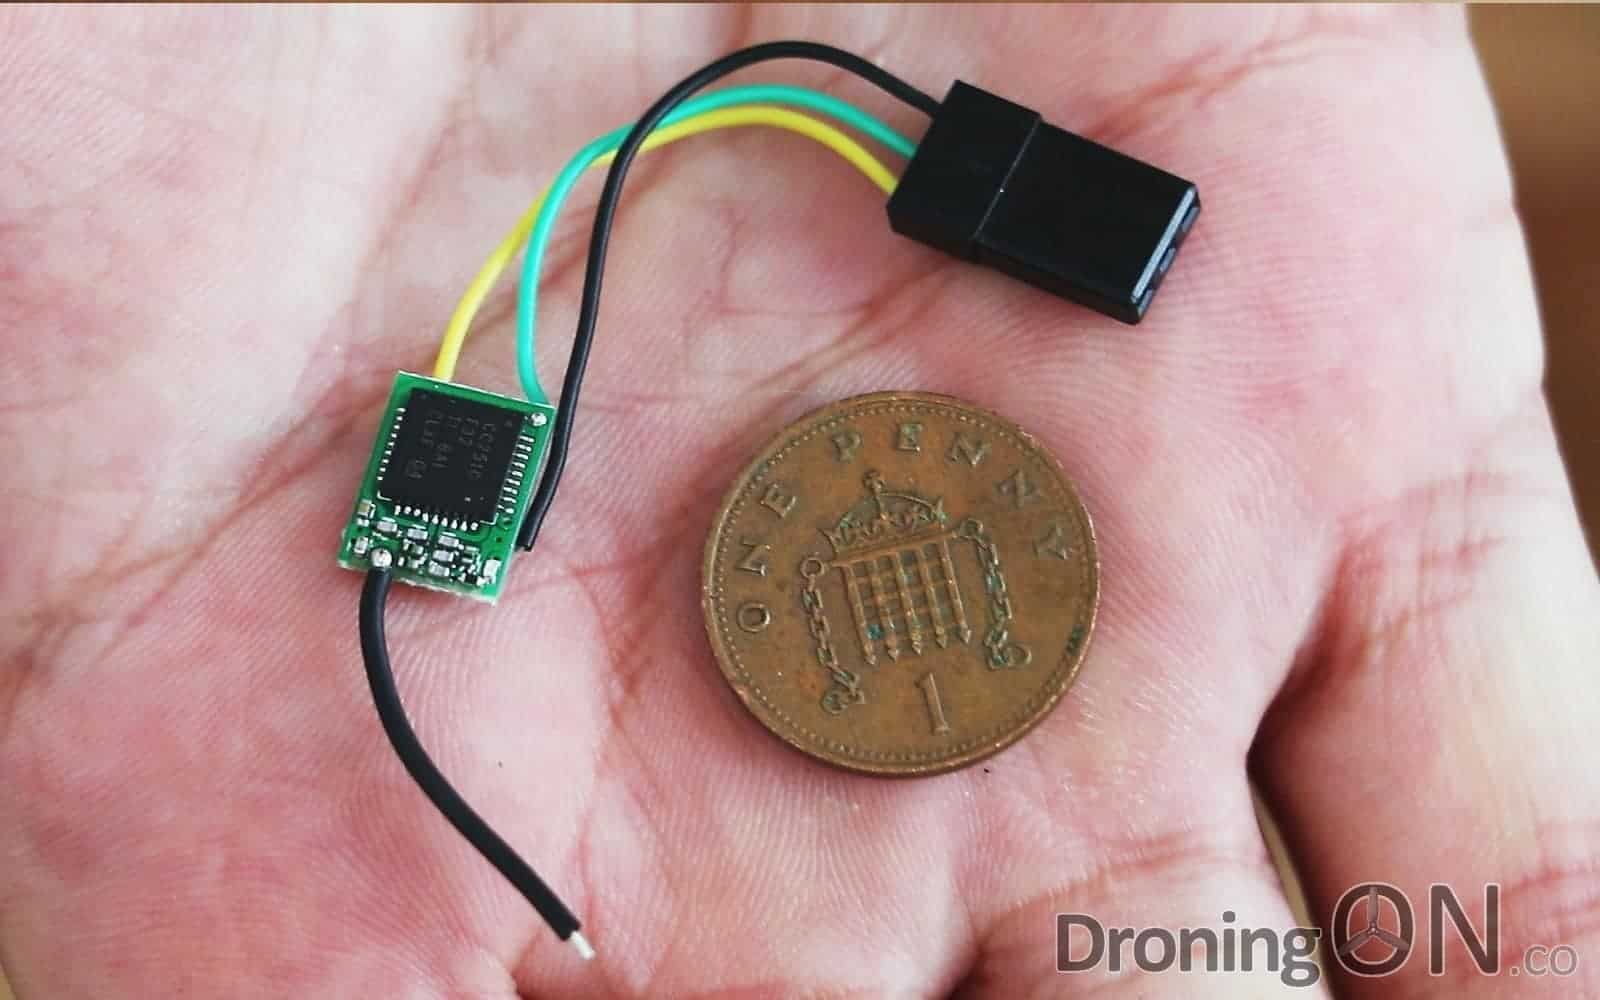 The iRangeX RX803, said to be the "worlds smallest" 2.4ghz FrSky receiver, costing less than $7/£6.